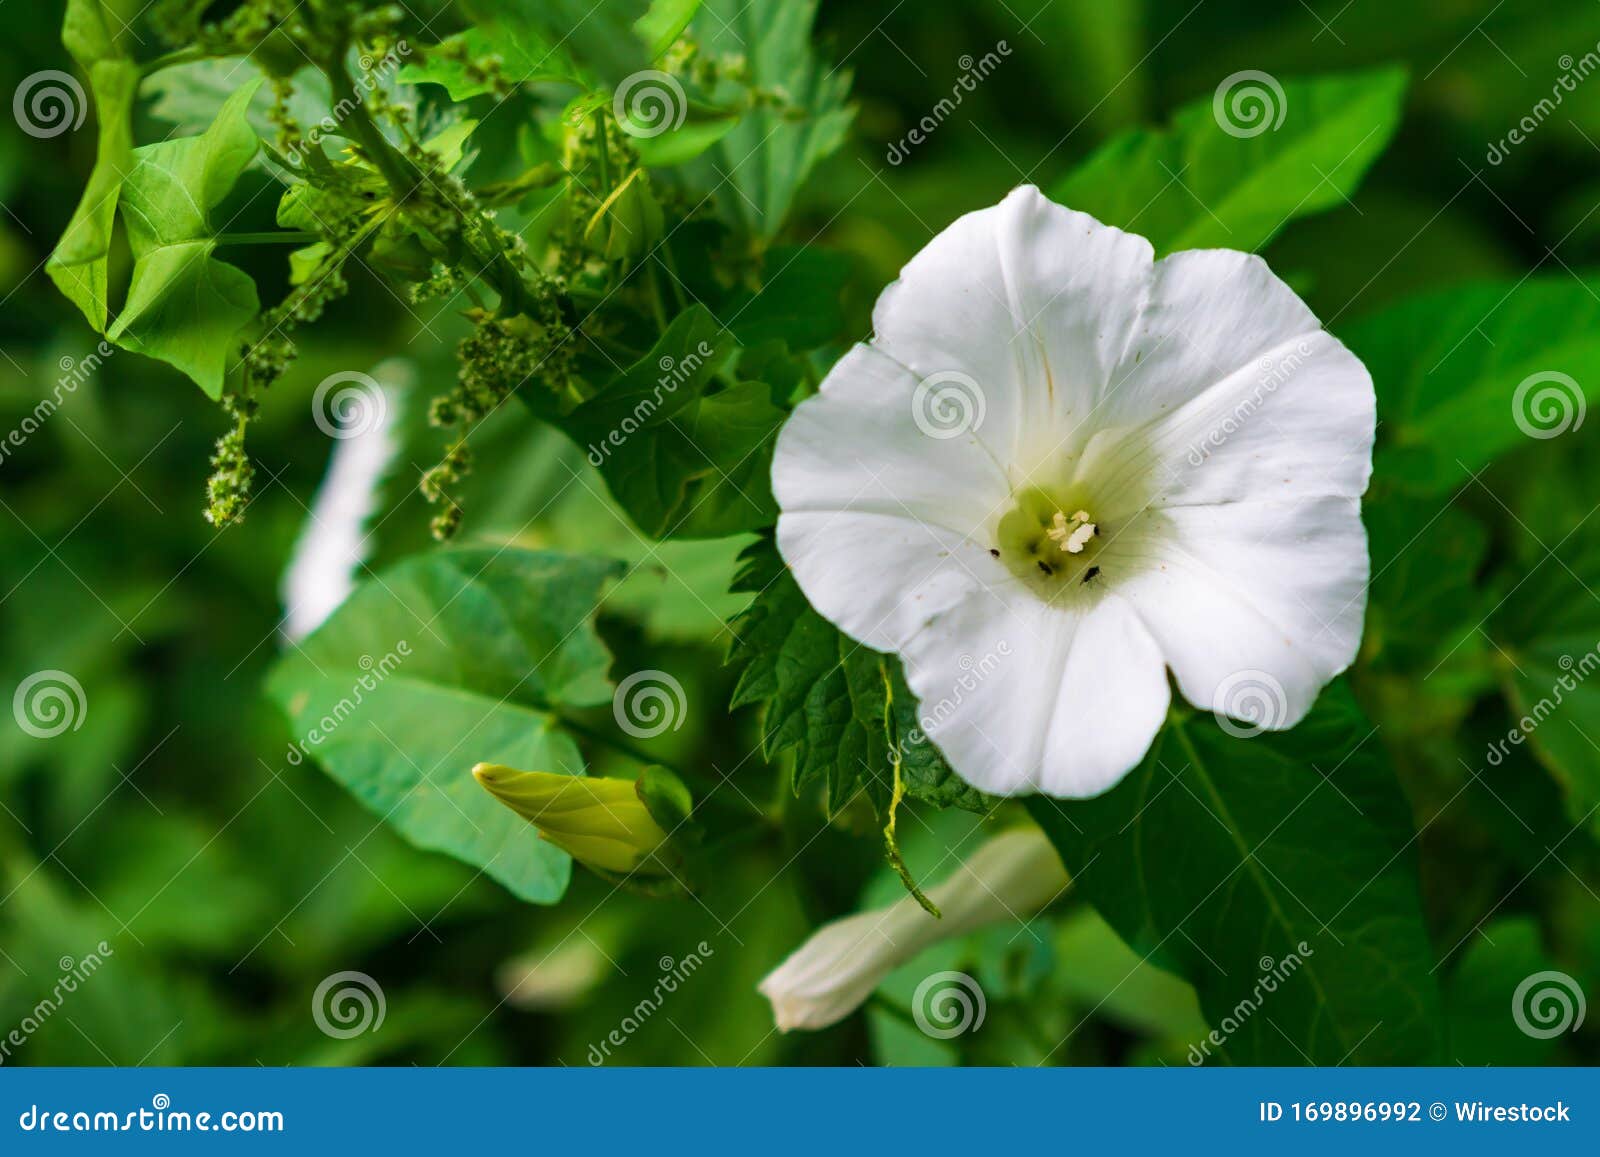 white beach moonflower in a garden surrounded by greenery with a blurry background